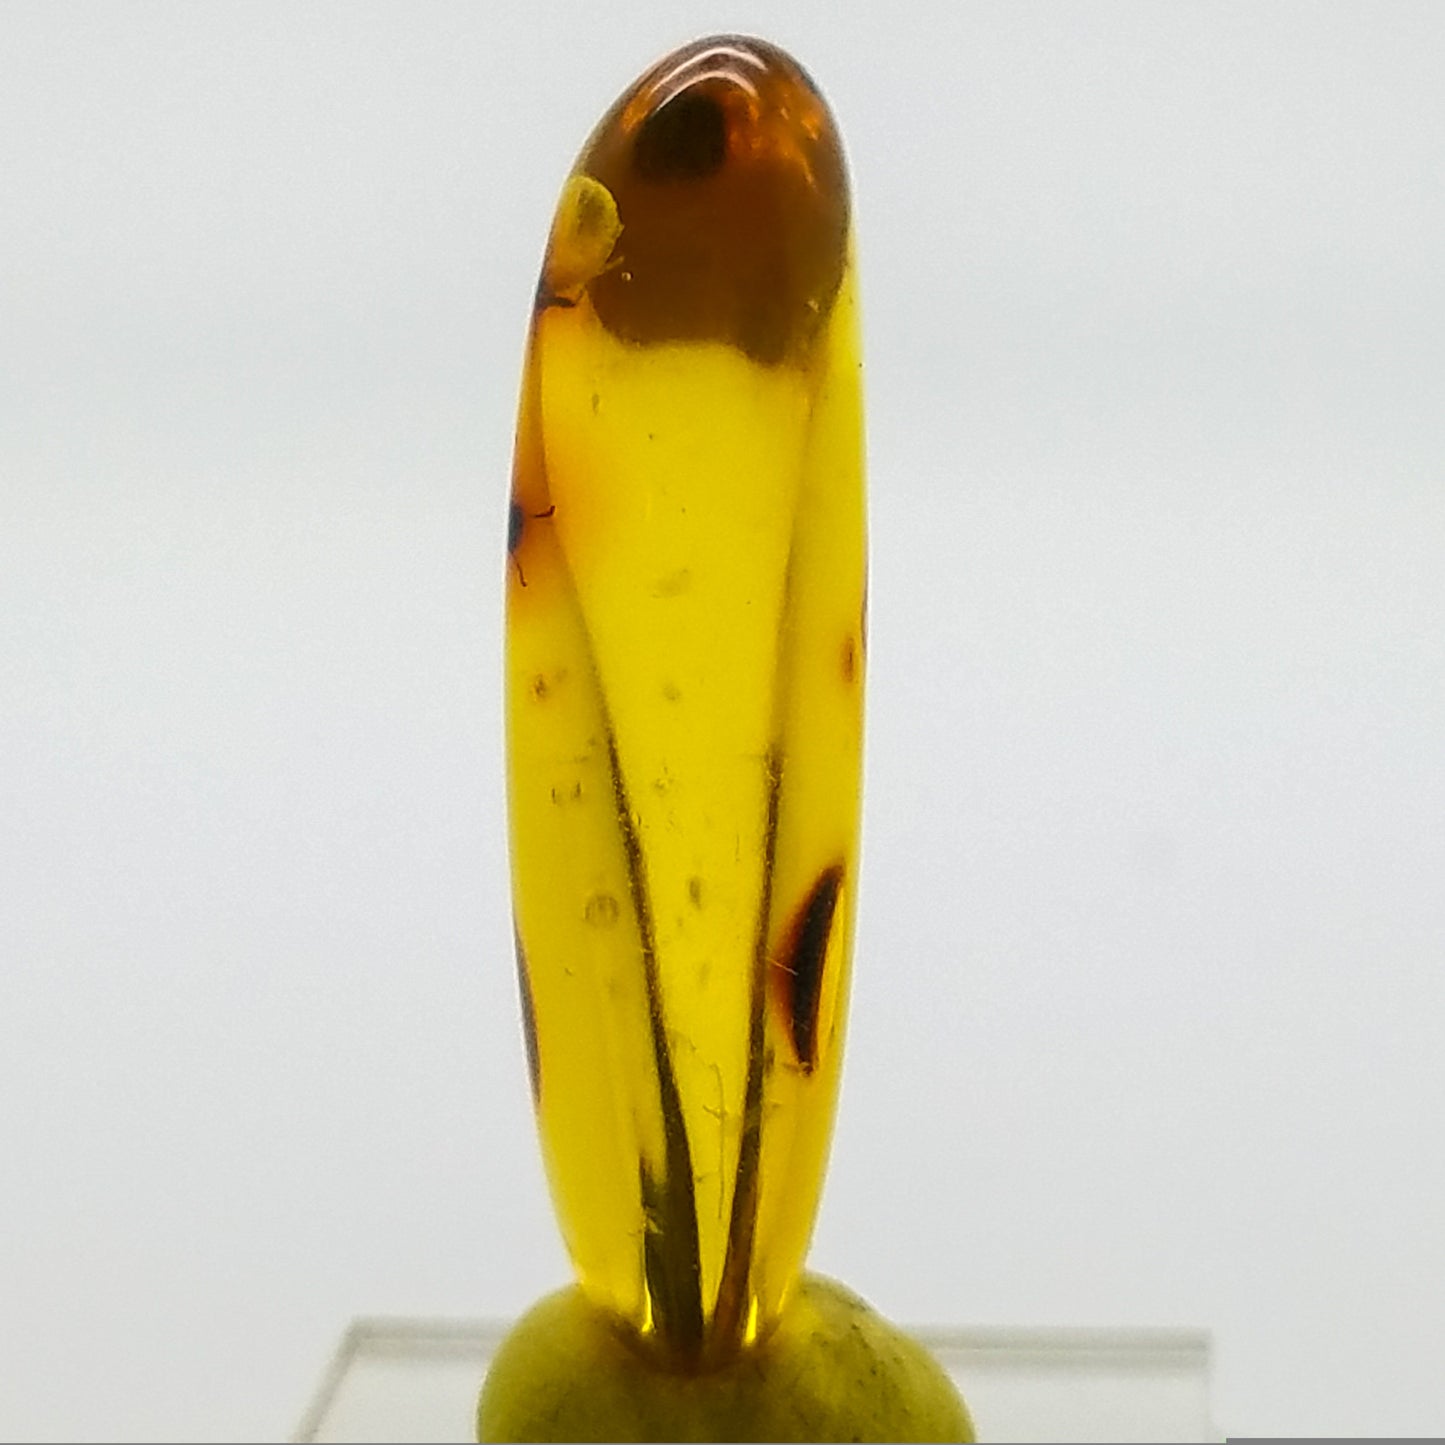 Superb AMBER with 3 Insect Inclusions | Colombia